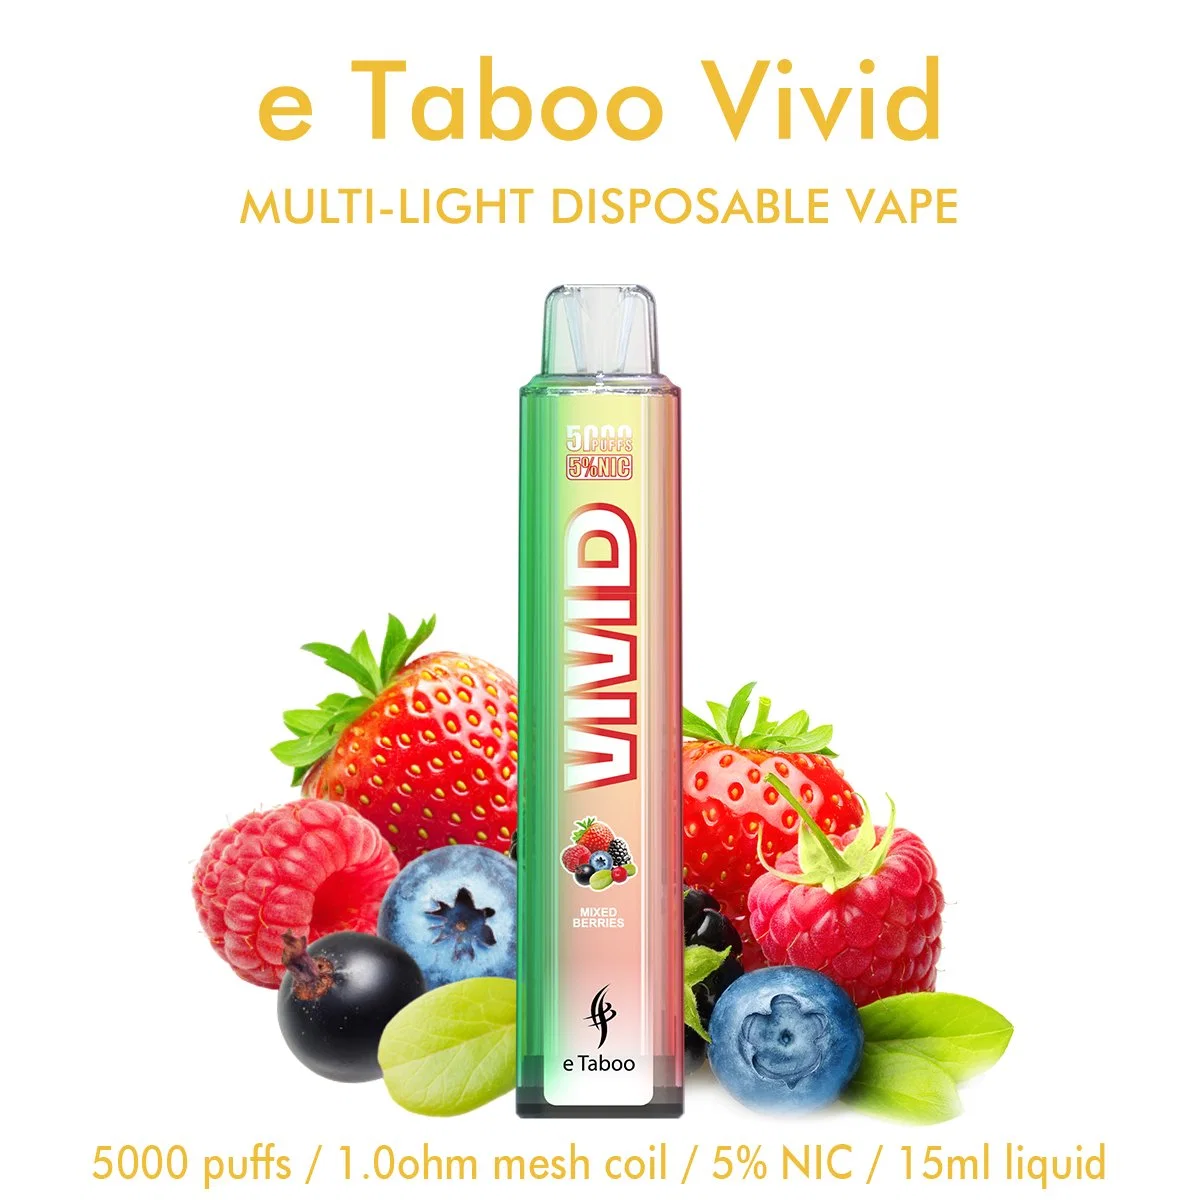 Mesh Coil Rechargeable 5000 Puffs E Taboo Vivid Glow Disposable Vape Light Switch Ecig Puff Bar Wholesale